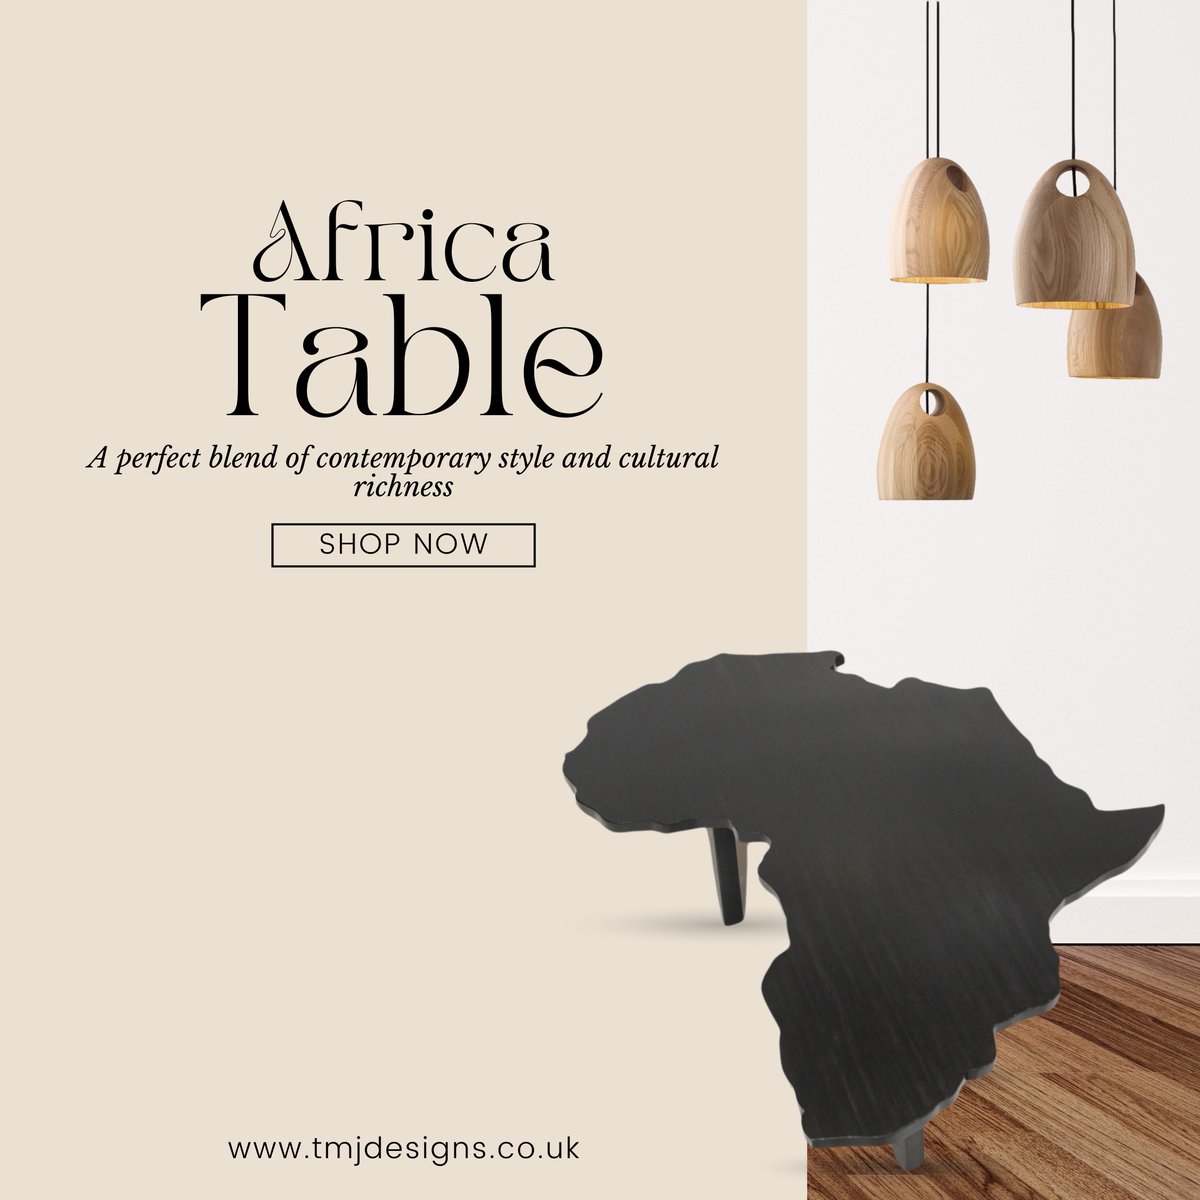 Crafted with quality materials, it stands out as a sturdy and captivating focal point, seamlessly merging modern design with cultural significance.

Shop Now: tmjdesigns.co.uk

#TMJDesigns #shopwithus #eBayfinds #Furnituresale #coffeetable #furniturestoresnearme